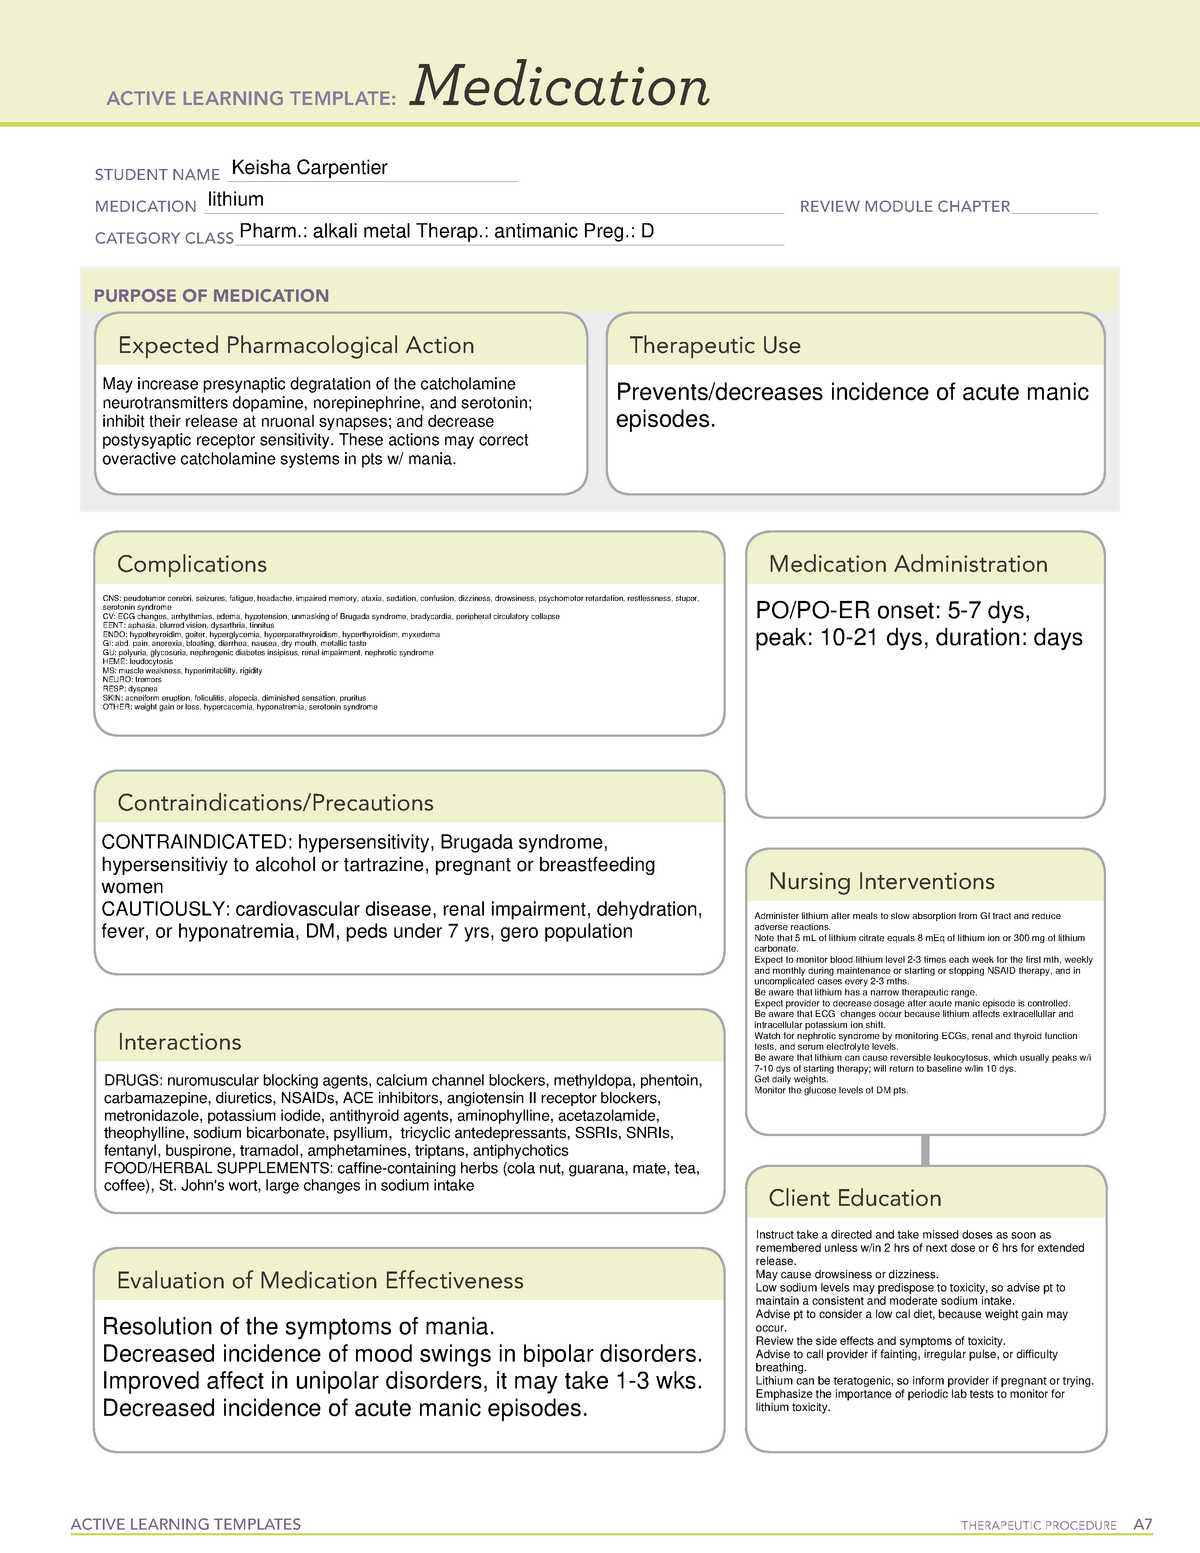 lithium-ati-med-card-active-learning-templates-therapeutic